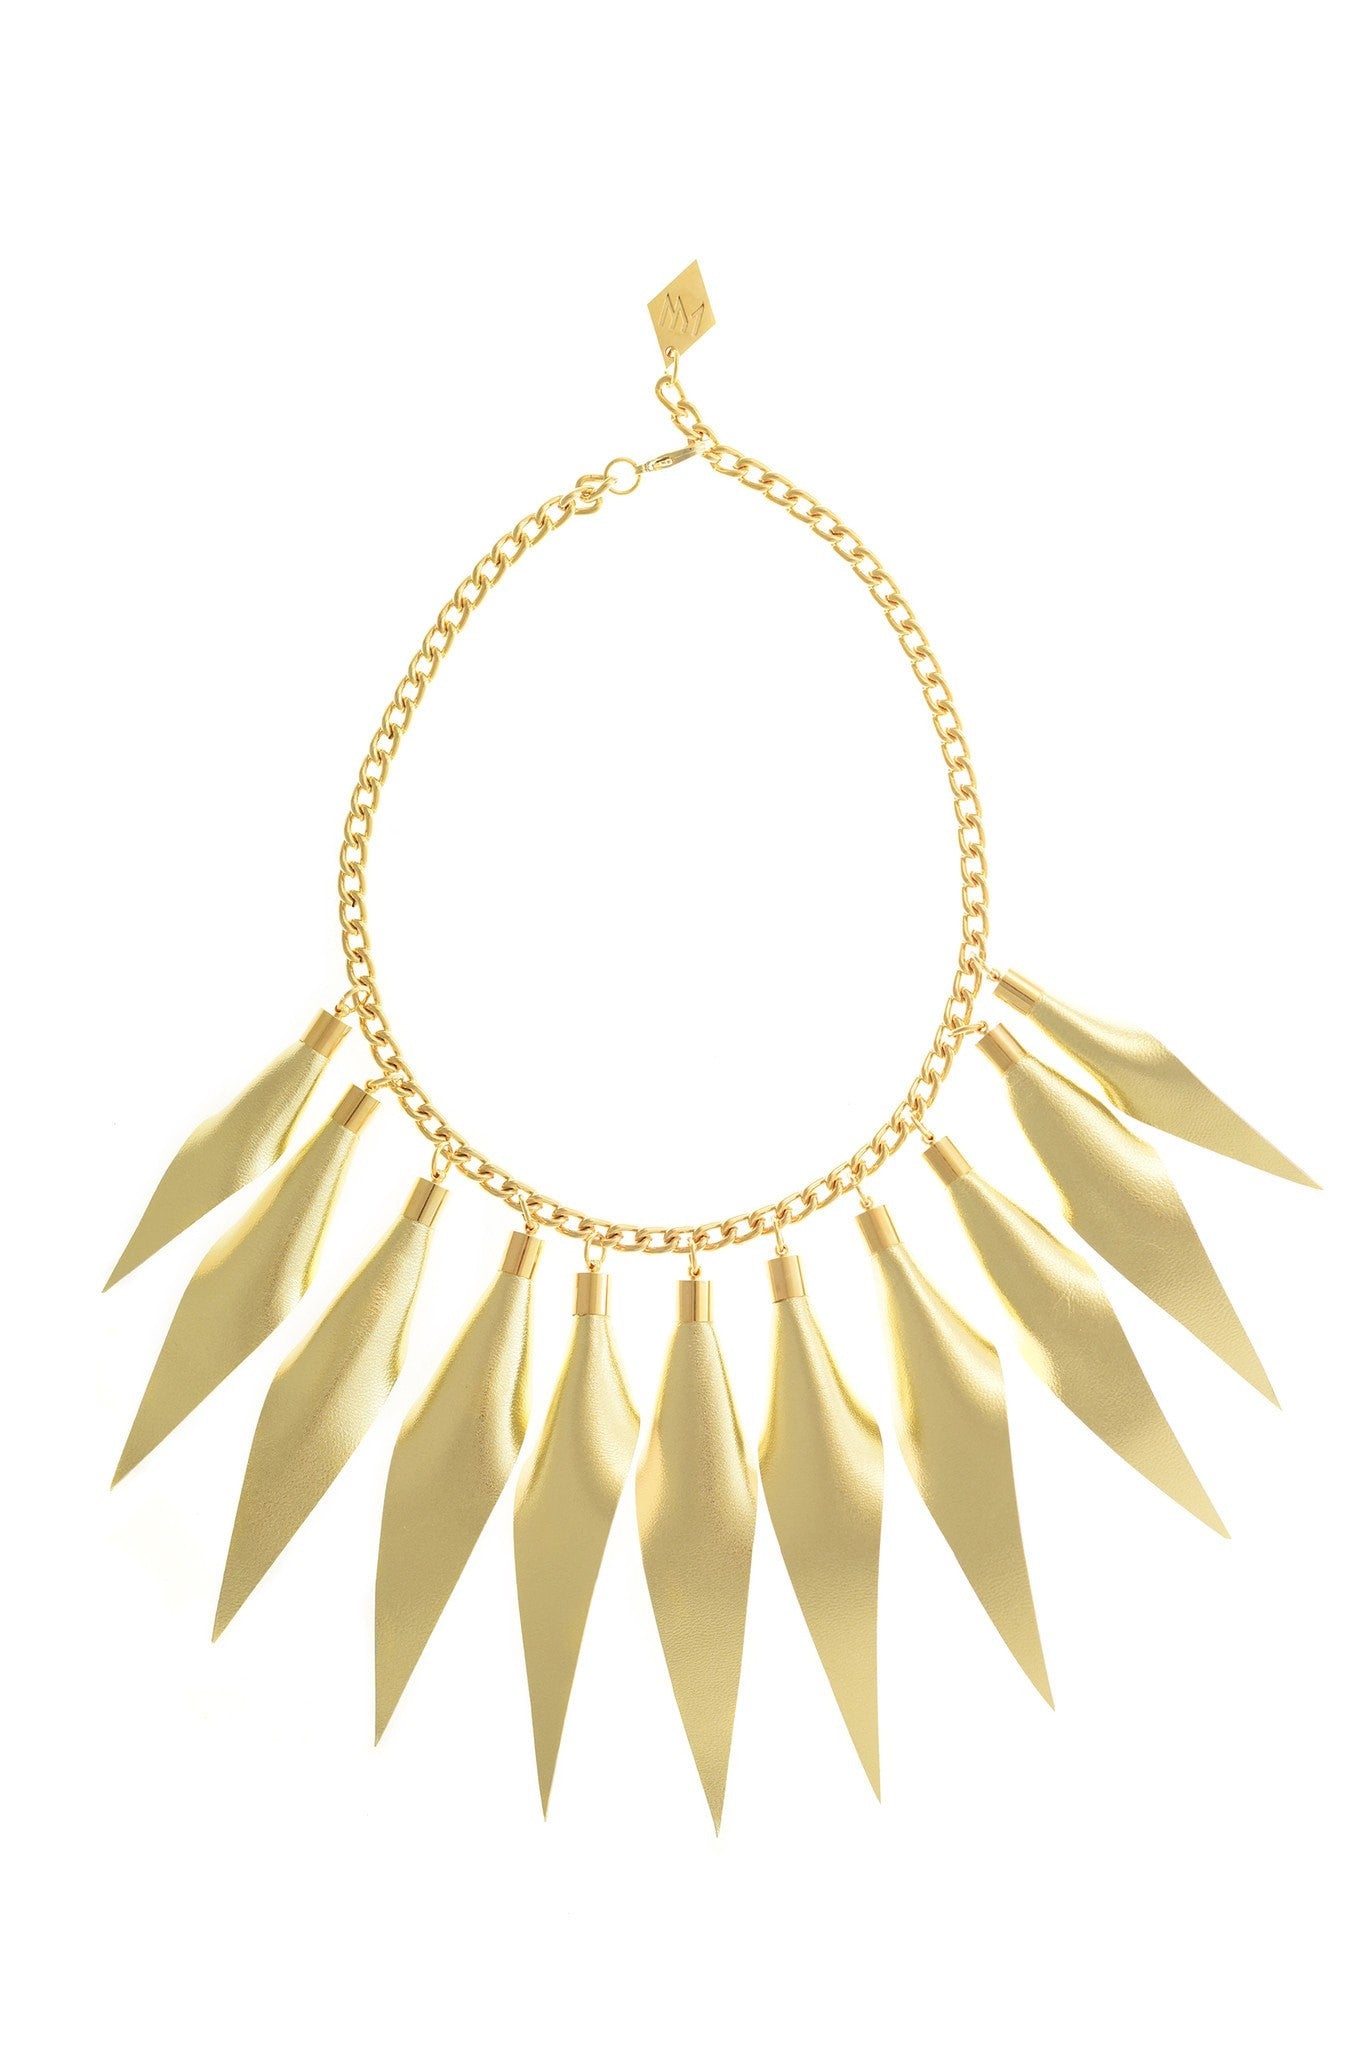 Golden edition: made of leather spikes with galvanized brass and metal components.